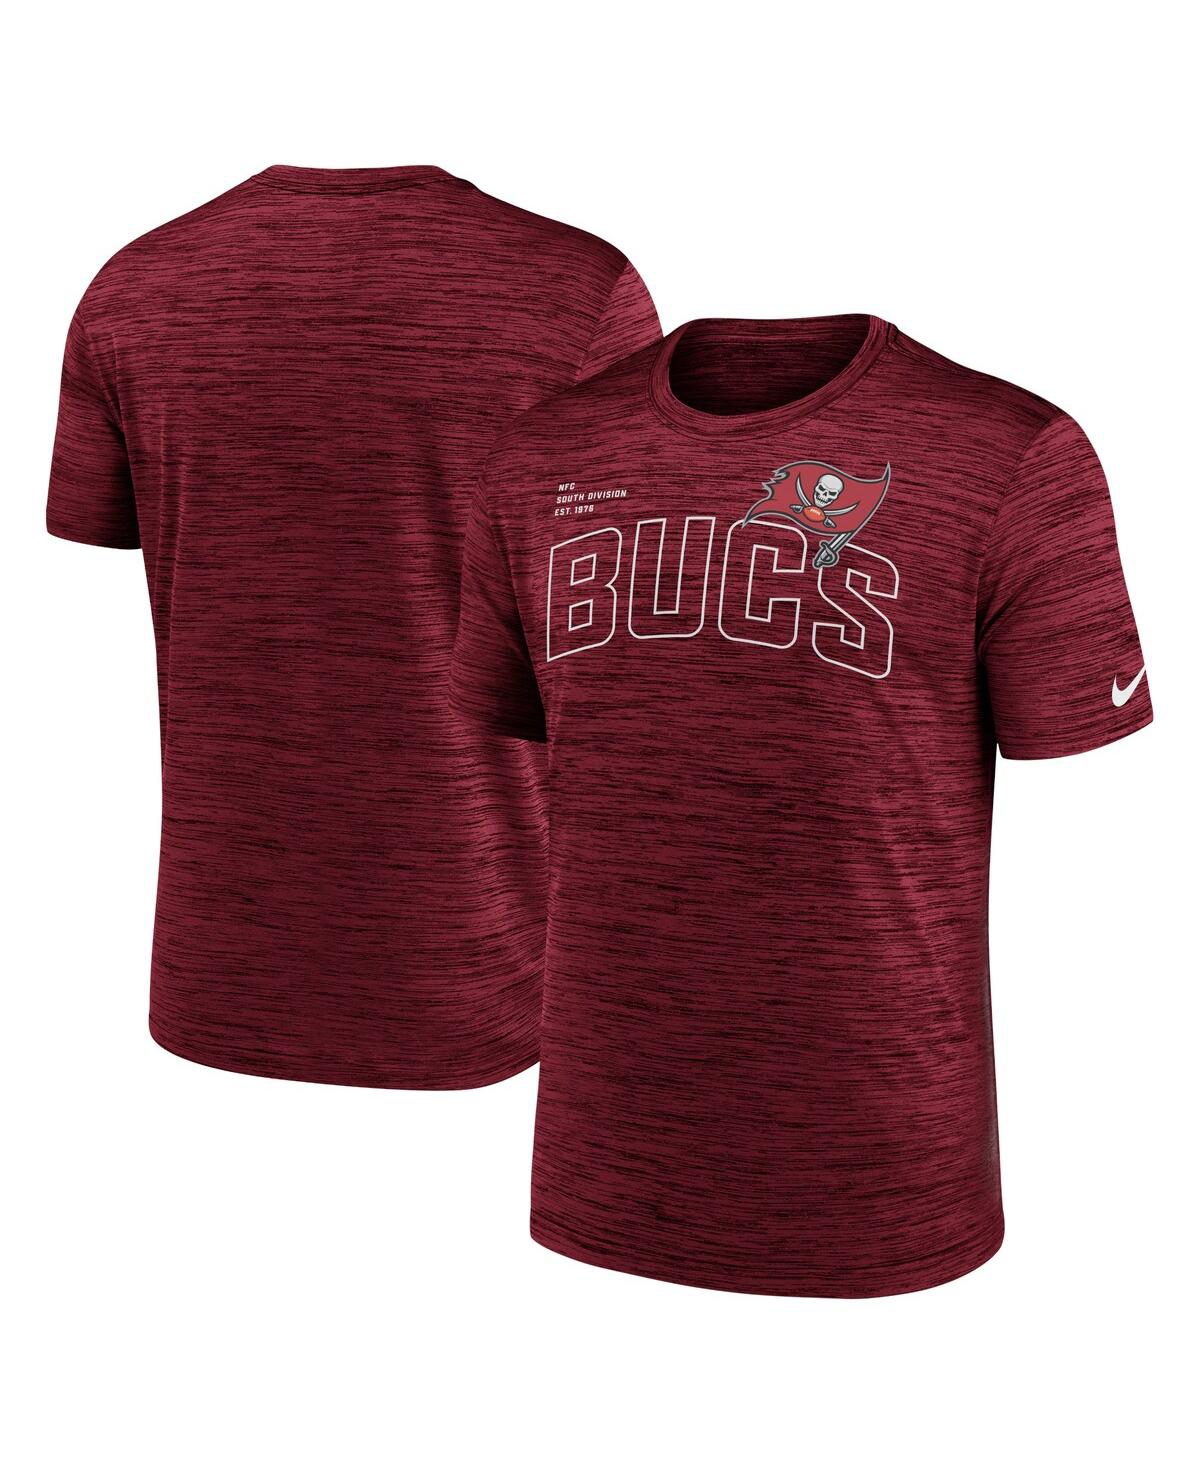 Nike Men's  Red Tampa Bay Buccaneers Velocity Arch Performance T-shirt